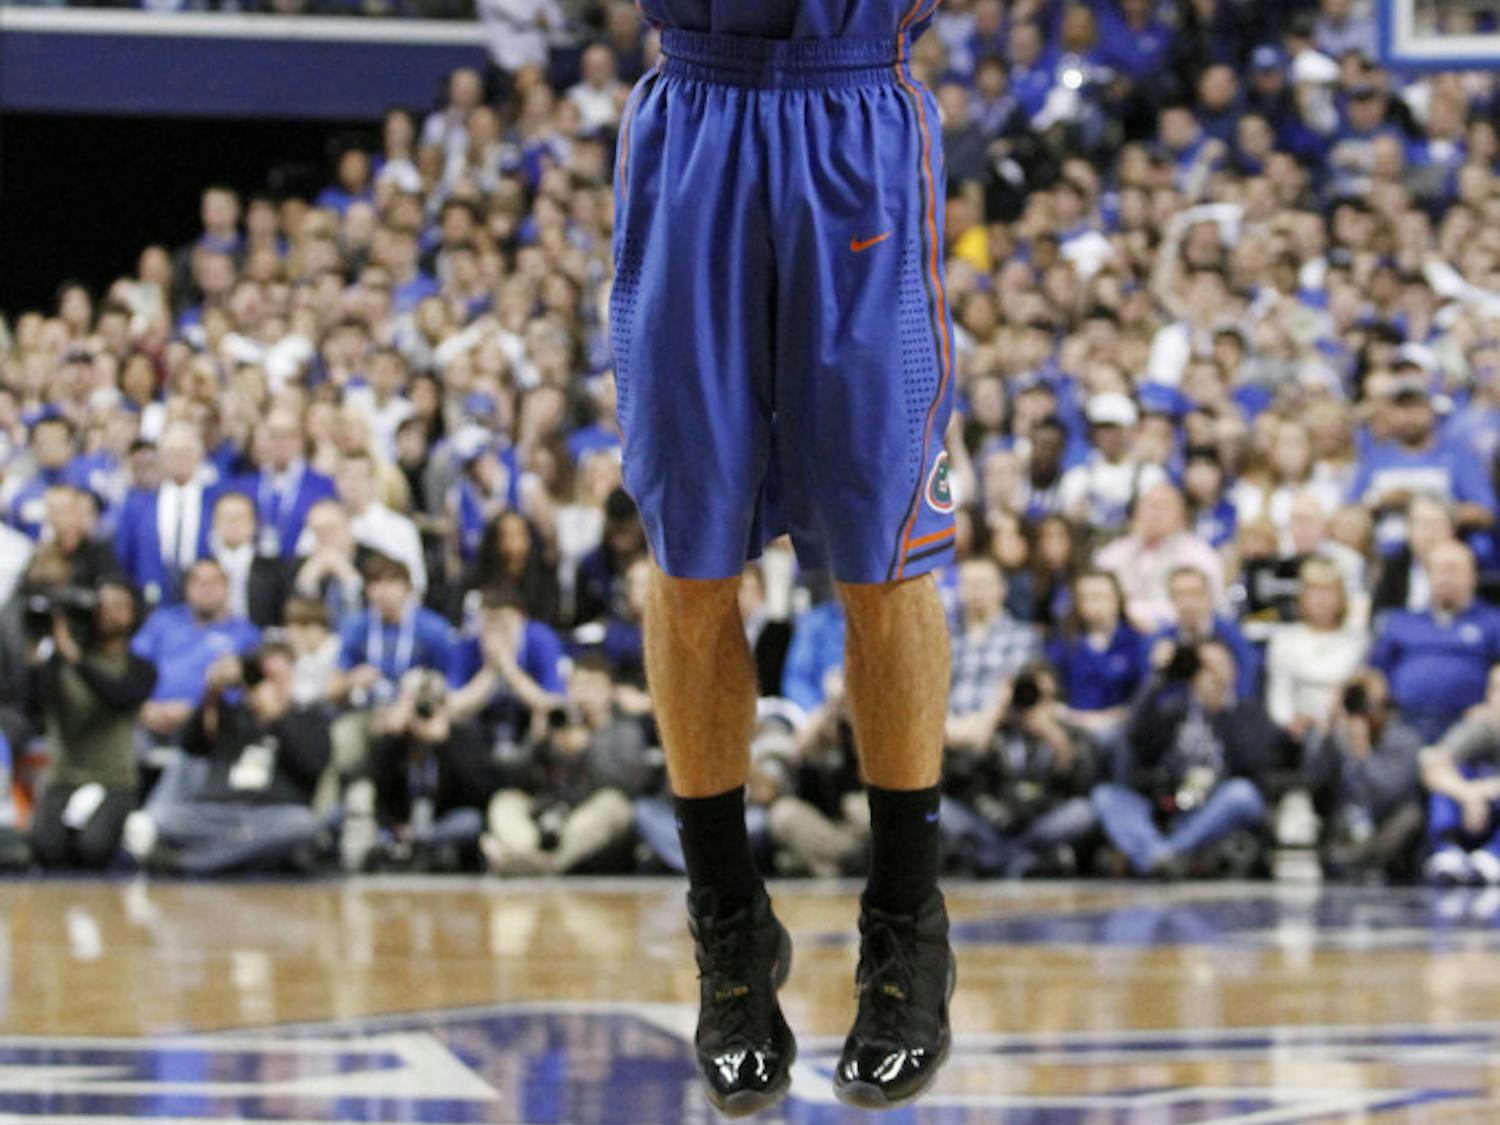 Scottie Wilbekin shoots an uncontested three-point shot during Florida’s 69-59 win against Kentucky on Saturday in Lexington, Ky. Wilbekin scored a career-high 23 points in the win, which was the Gators’ first in Rupp Arena since 2007.